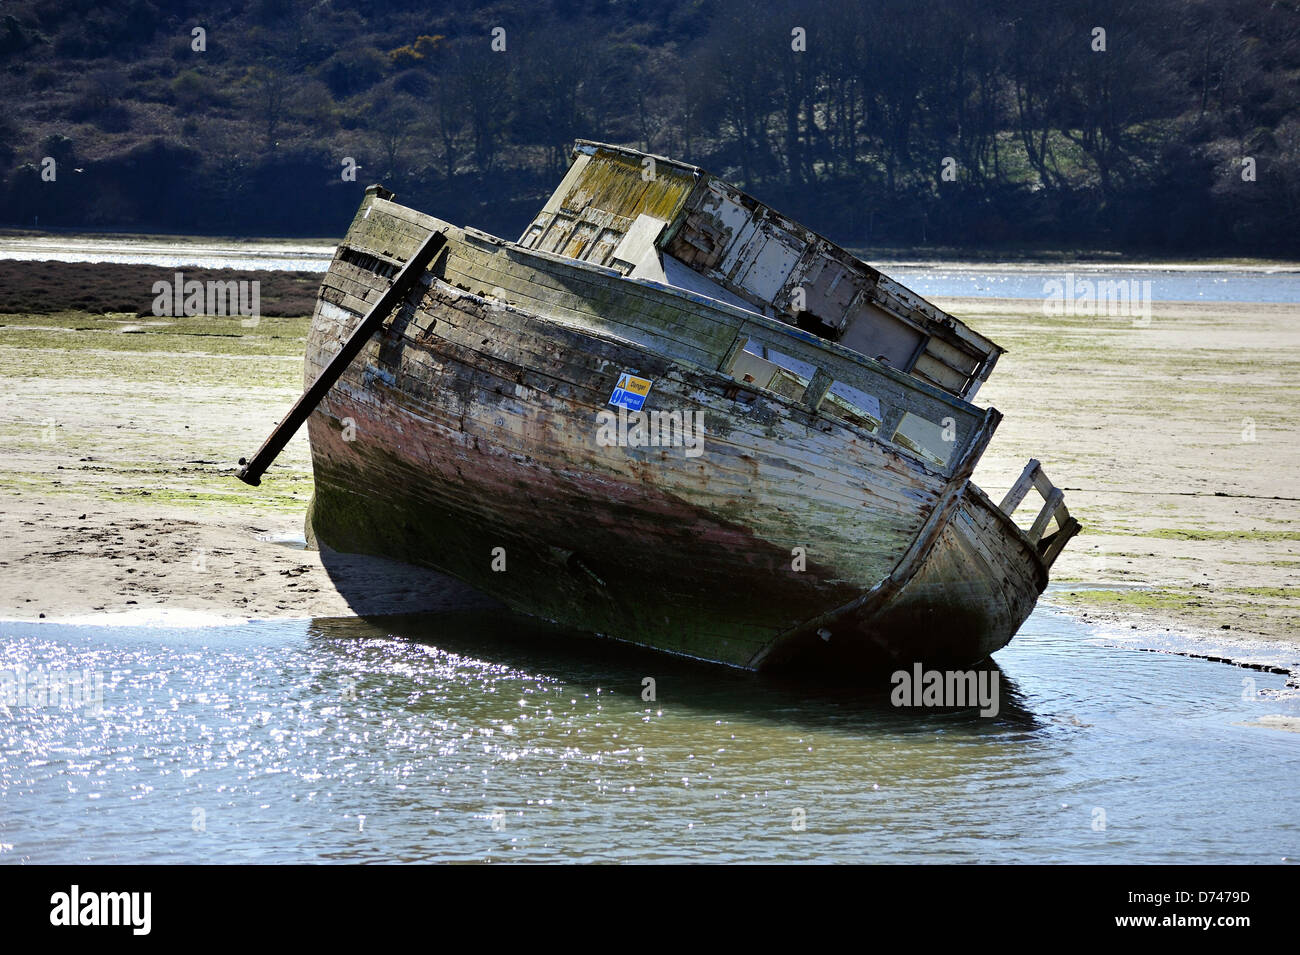 Old derelict boat slowly rotting in an estuary at low tide Stock Photo